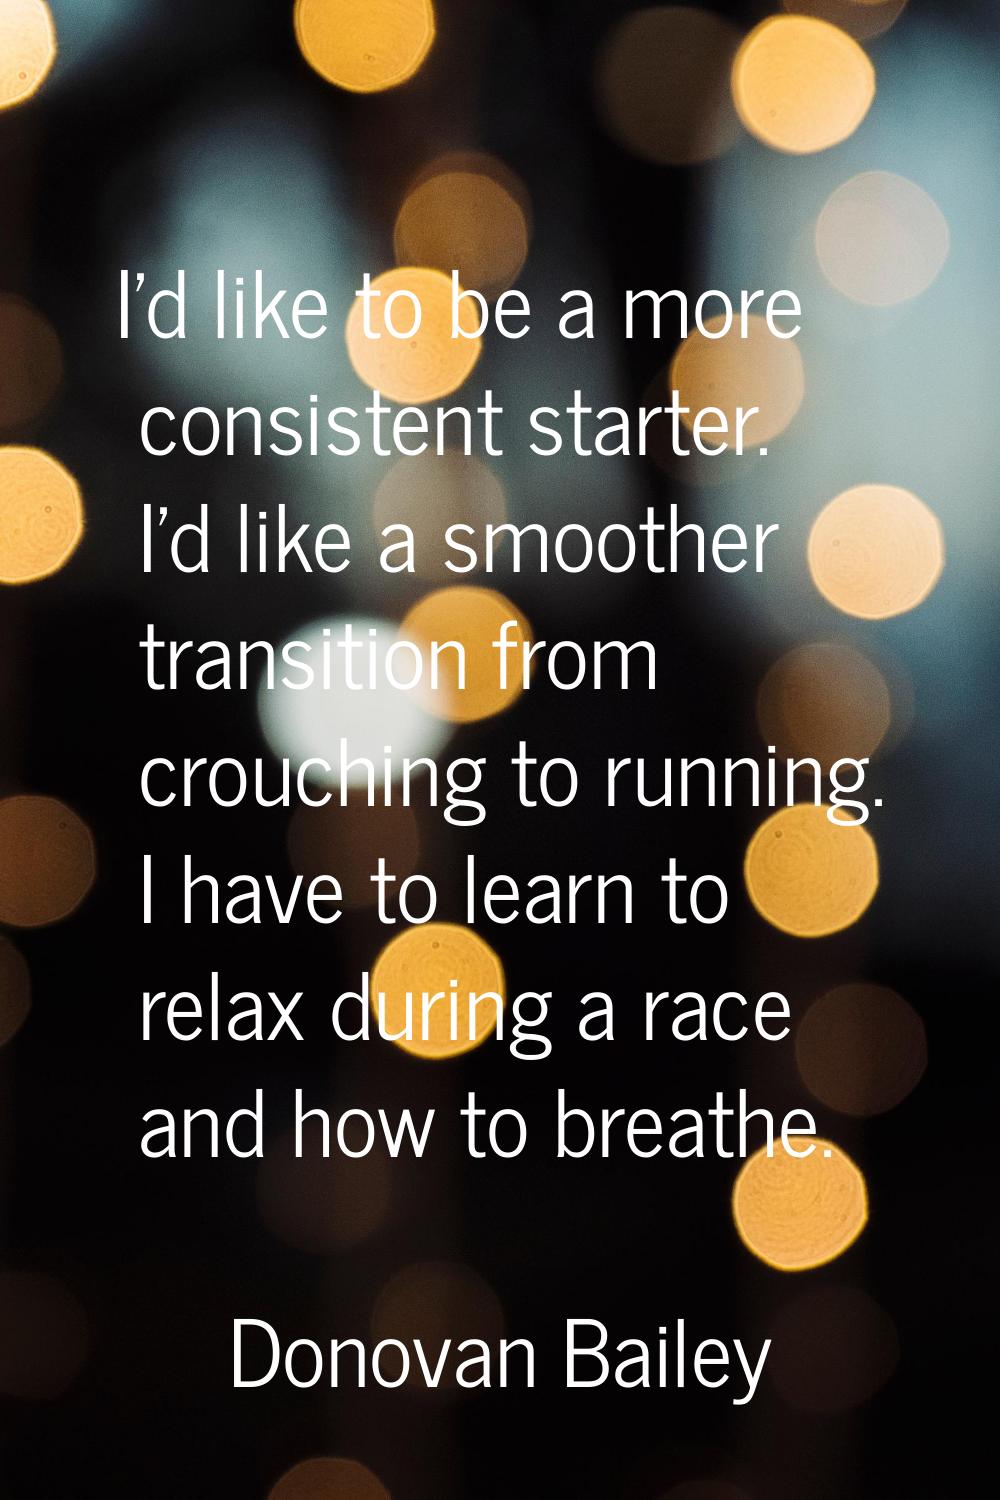 I'd like to be a more consistent starter. I'd like a smoother transition from crouching to running.